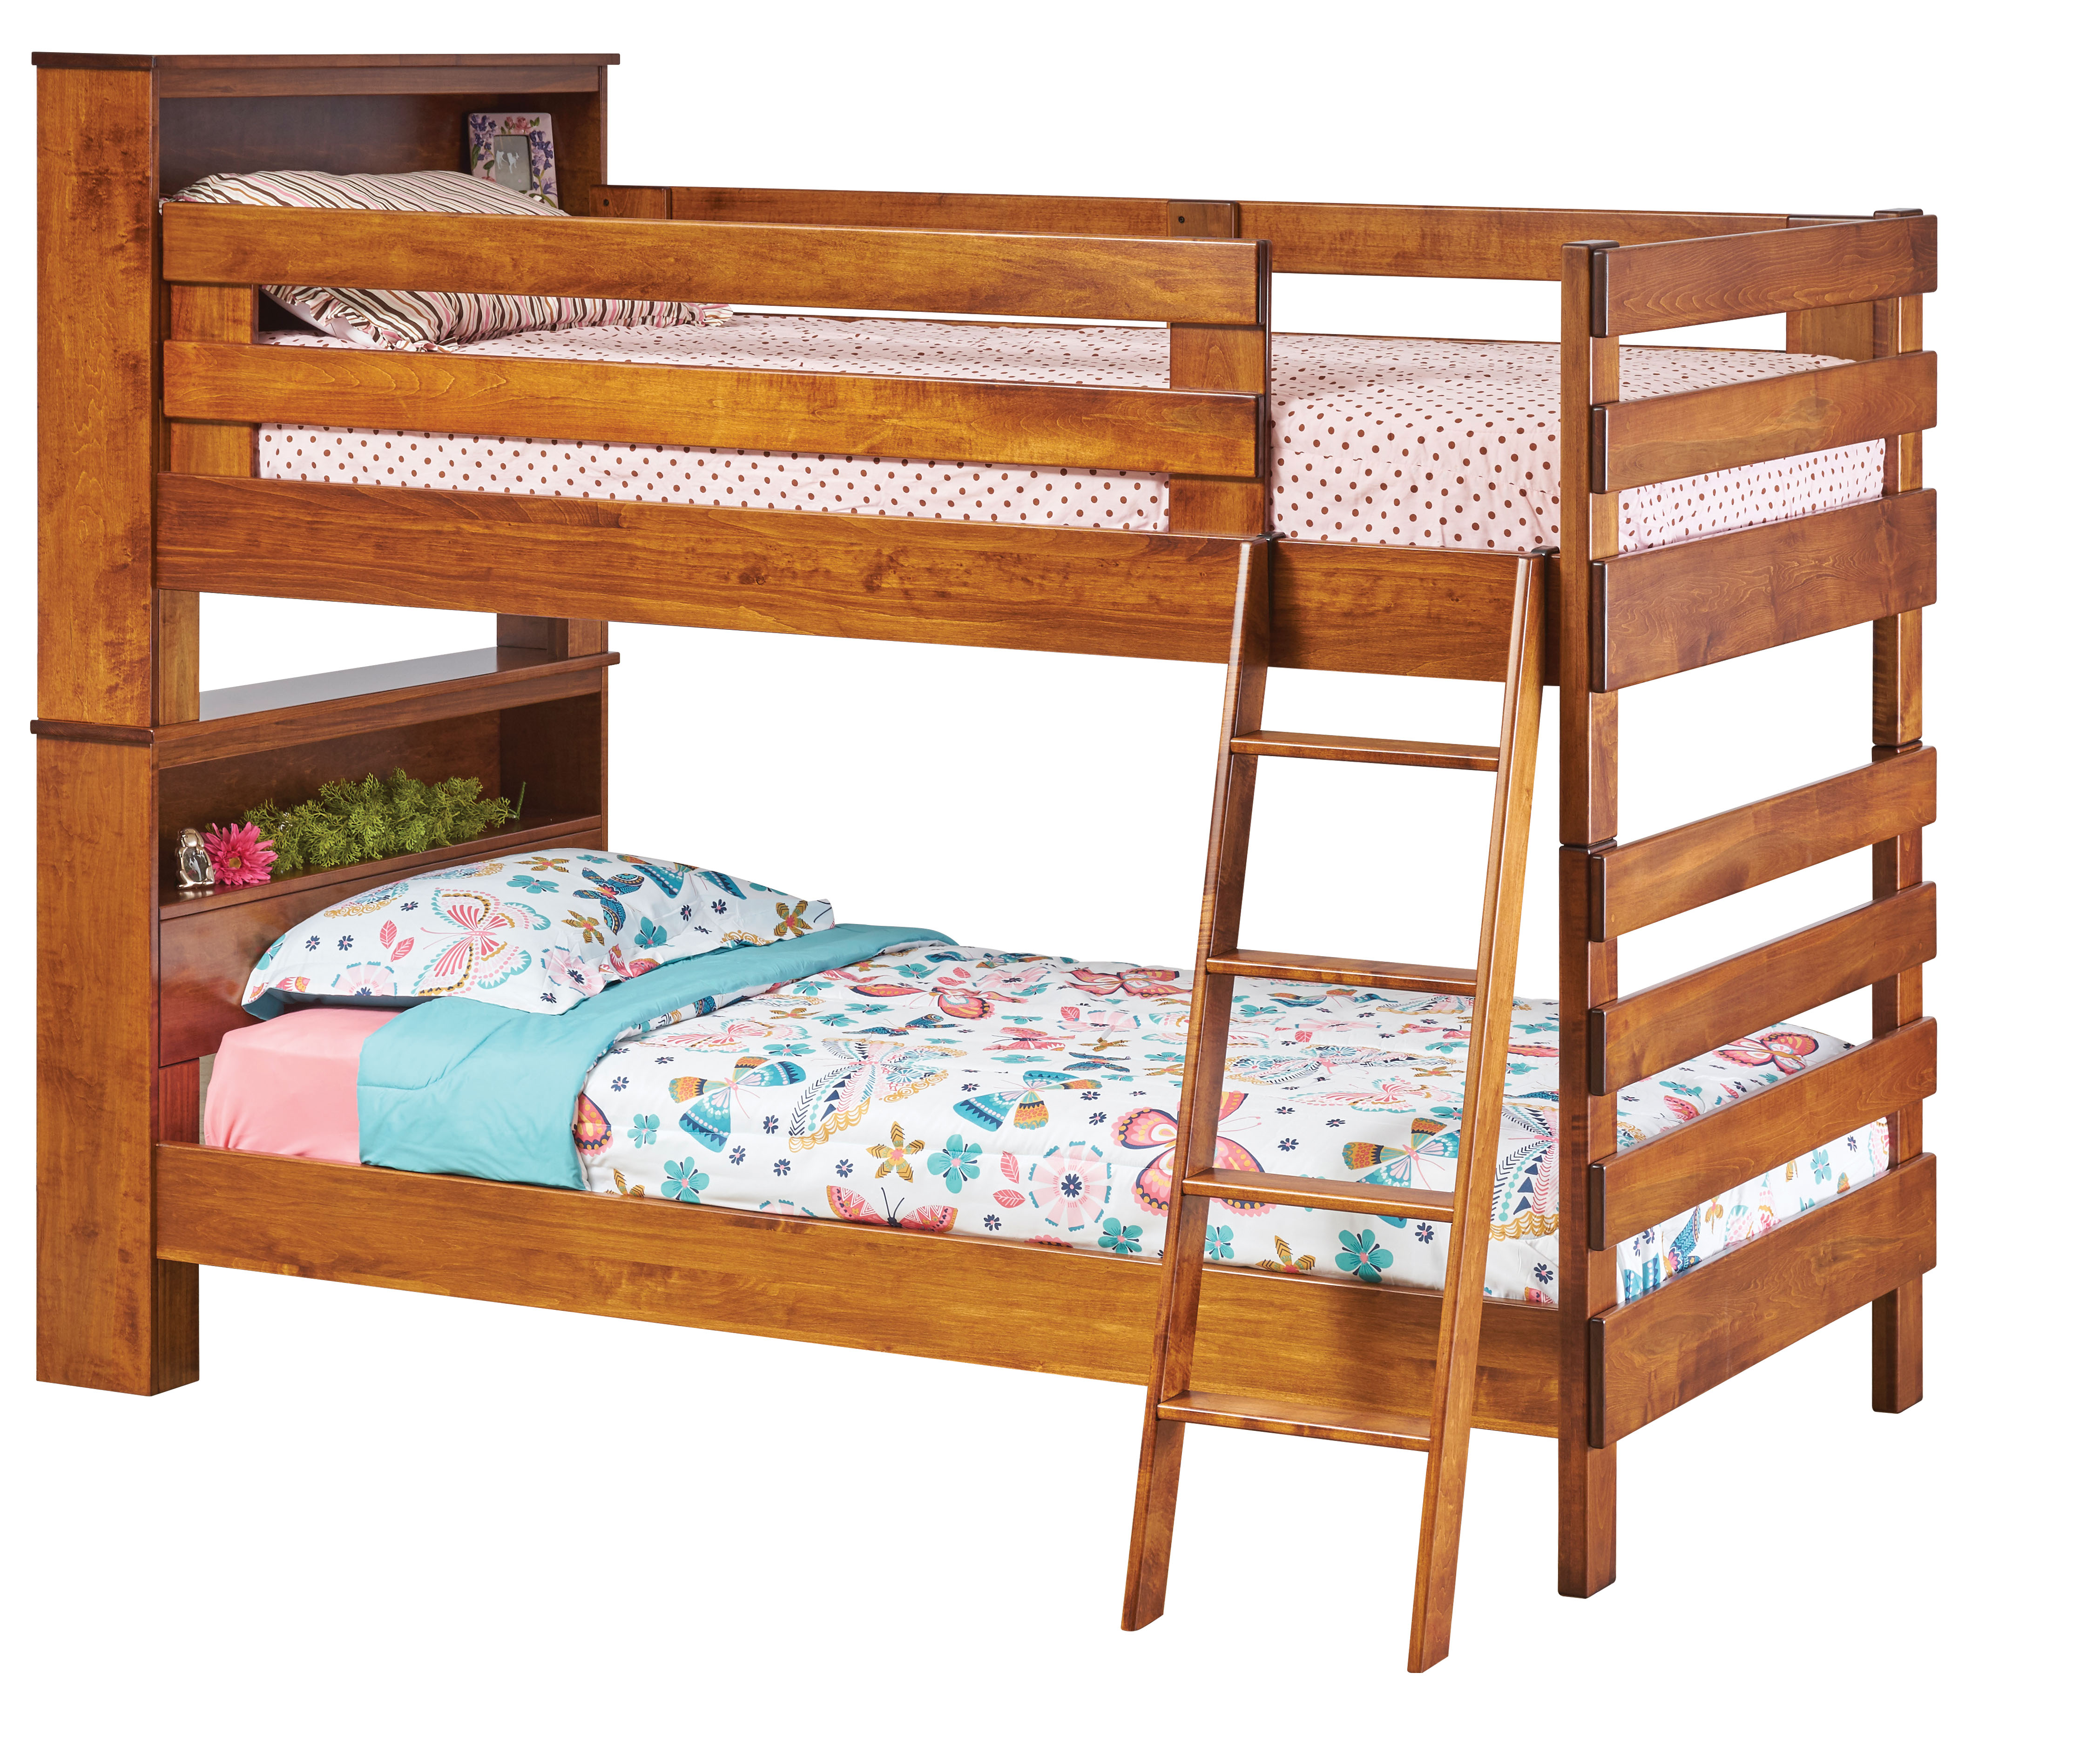 Bookcase Bunk Bed American Oak, Old Style Bunk Beds